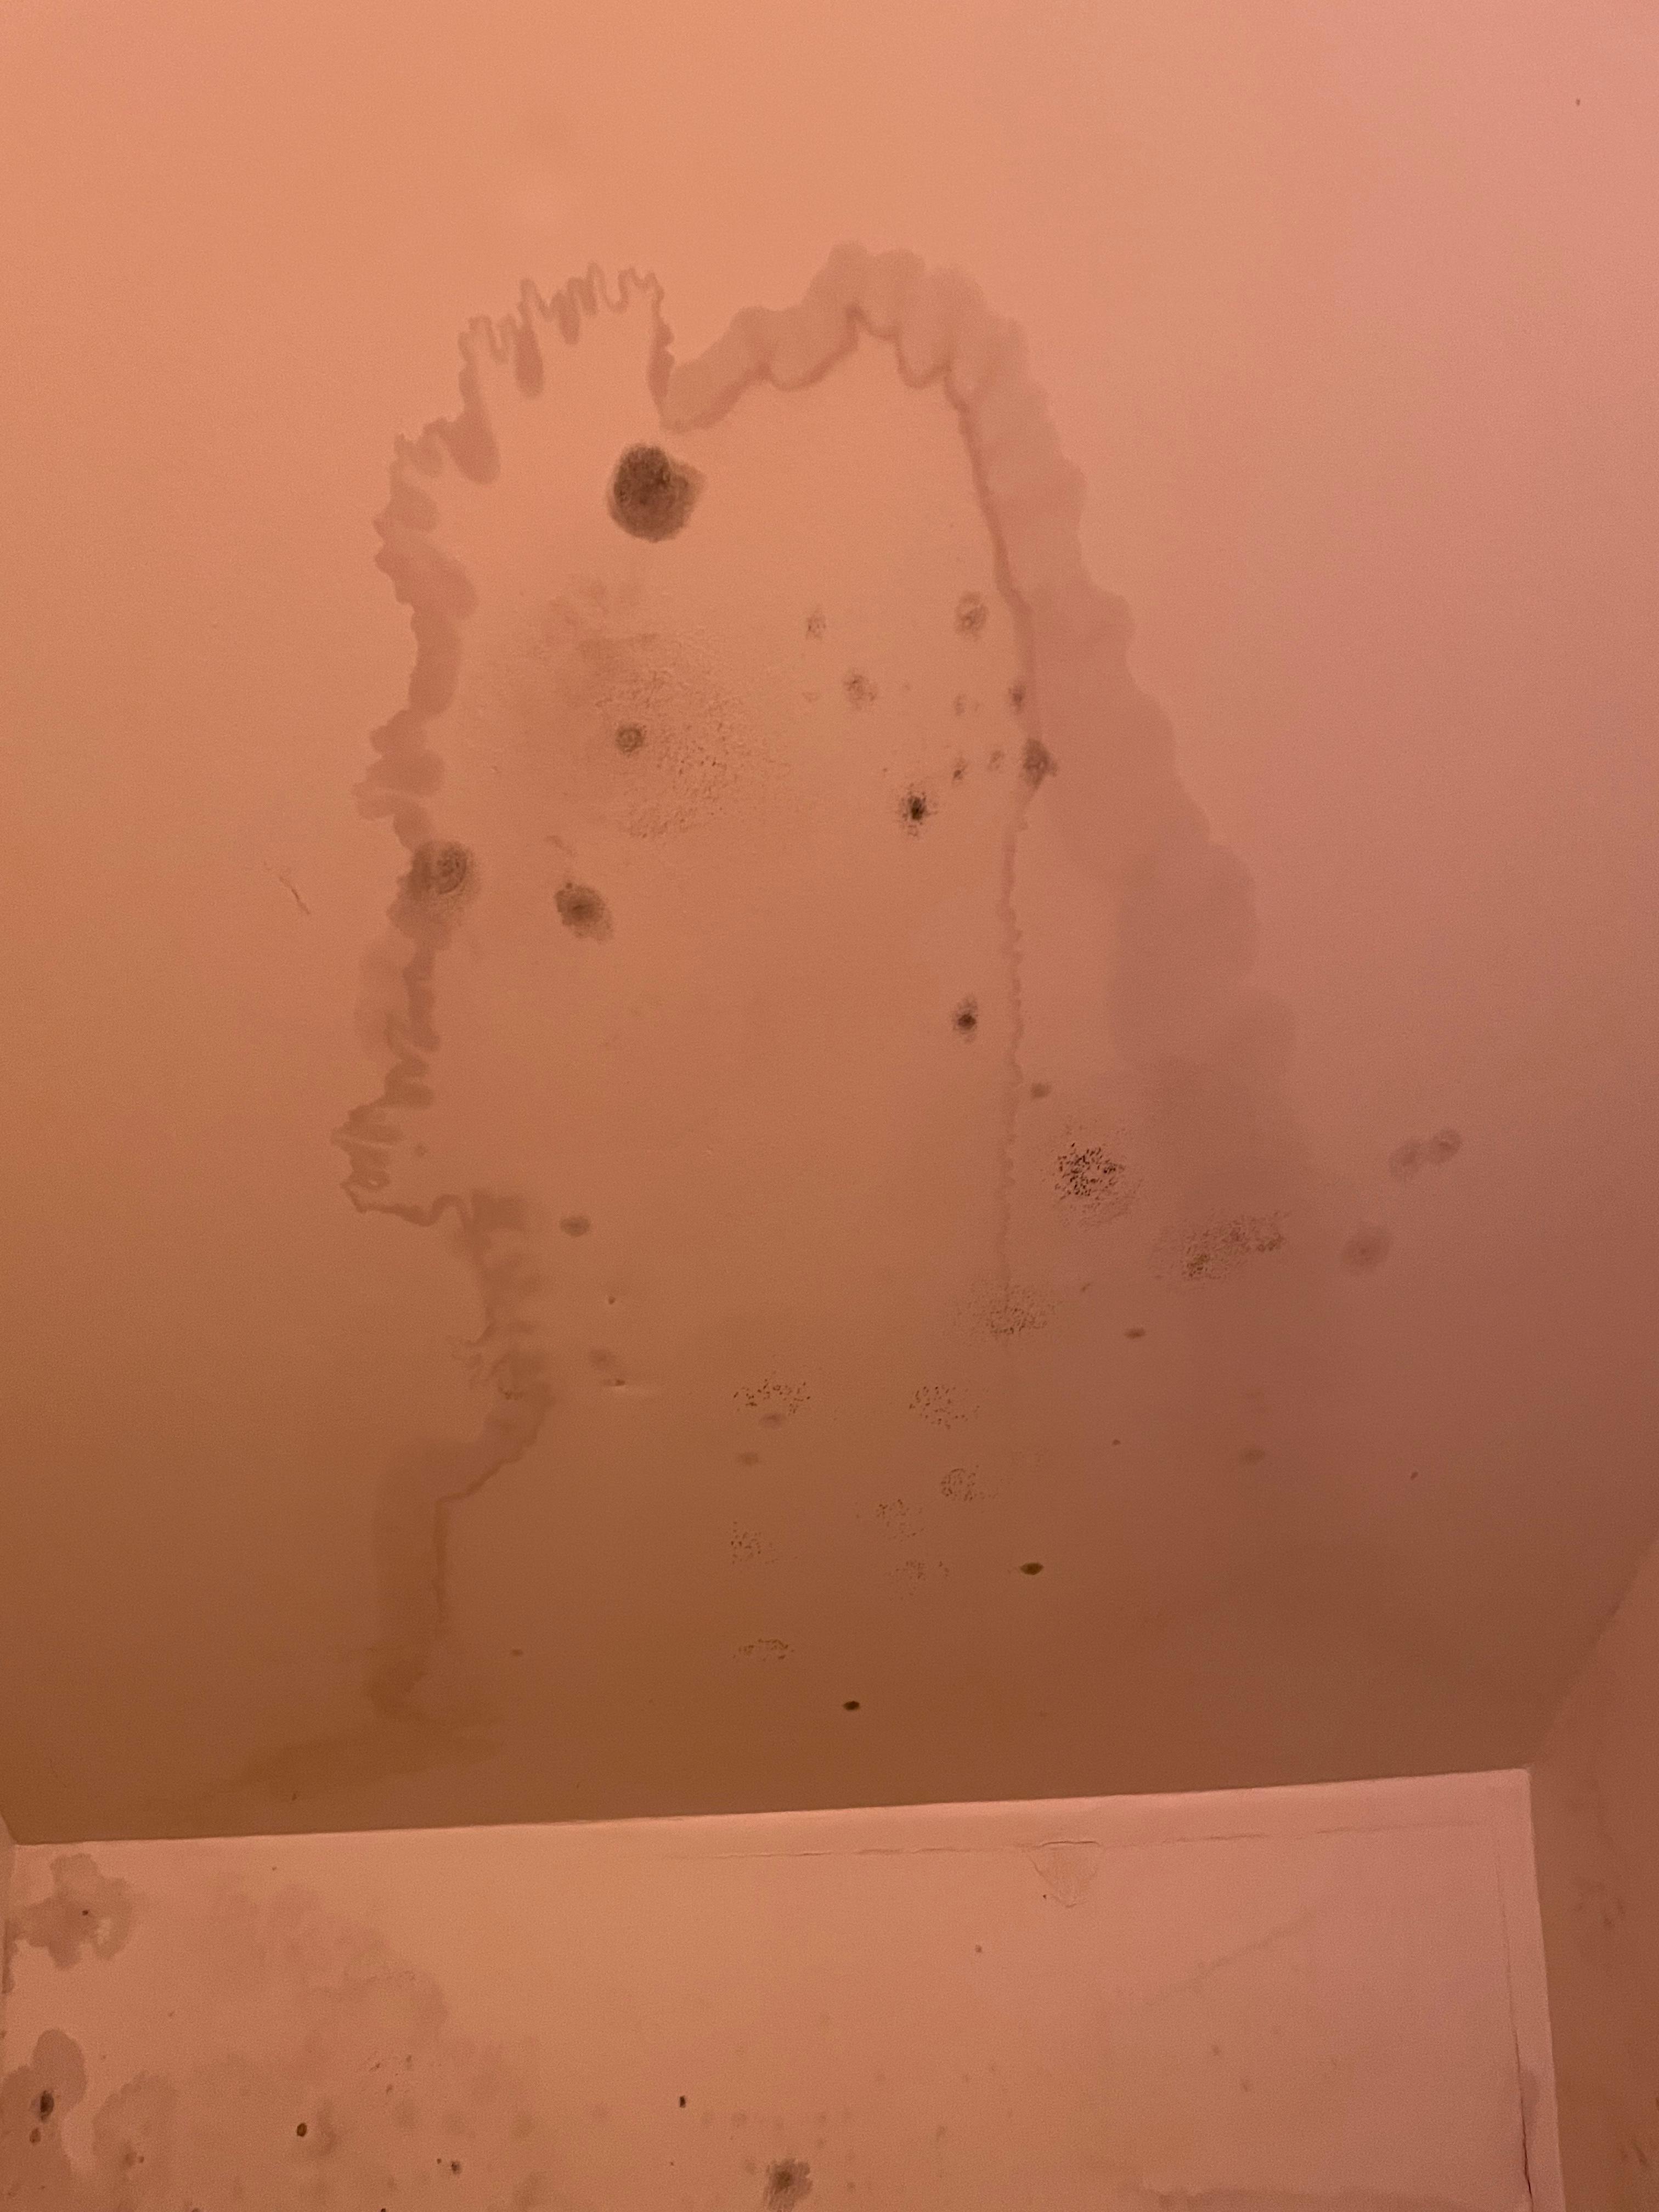 If your home or business suffers from a mold infestation, it is important you call your local mold remediation experts as quickly as possible! Waiting to call your local mold experts can result in extensive damage to your property.